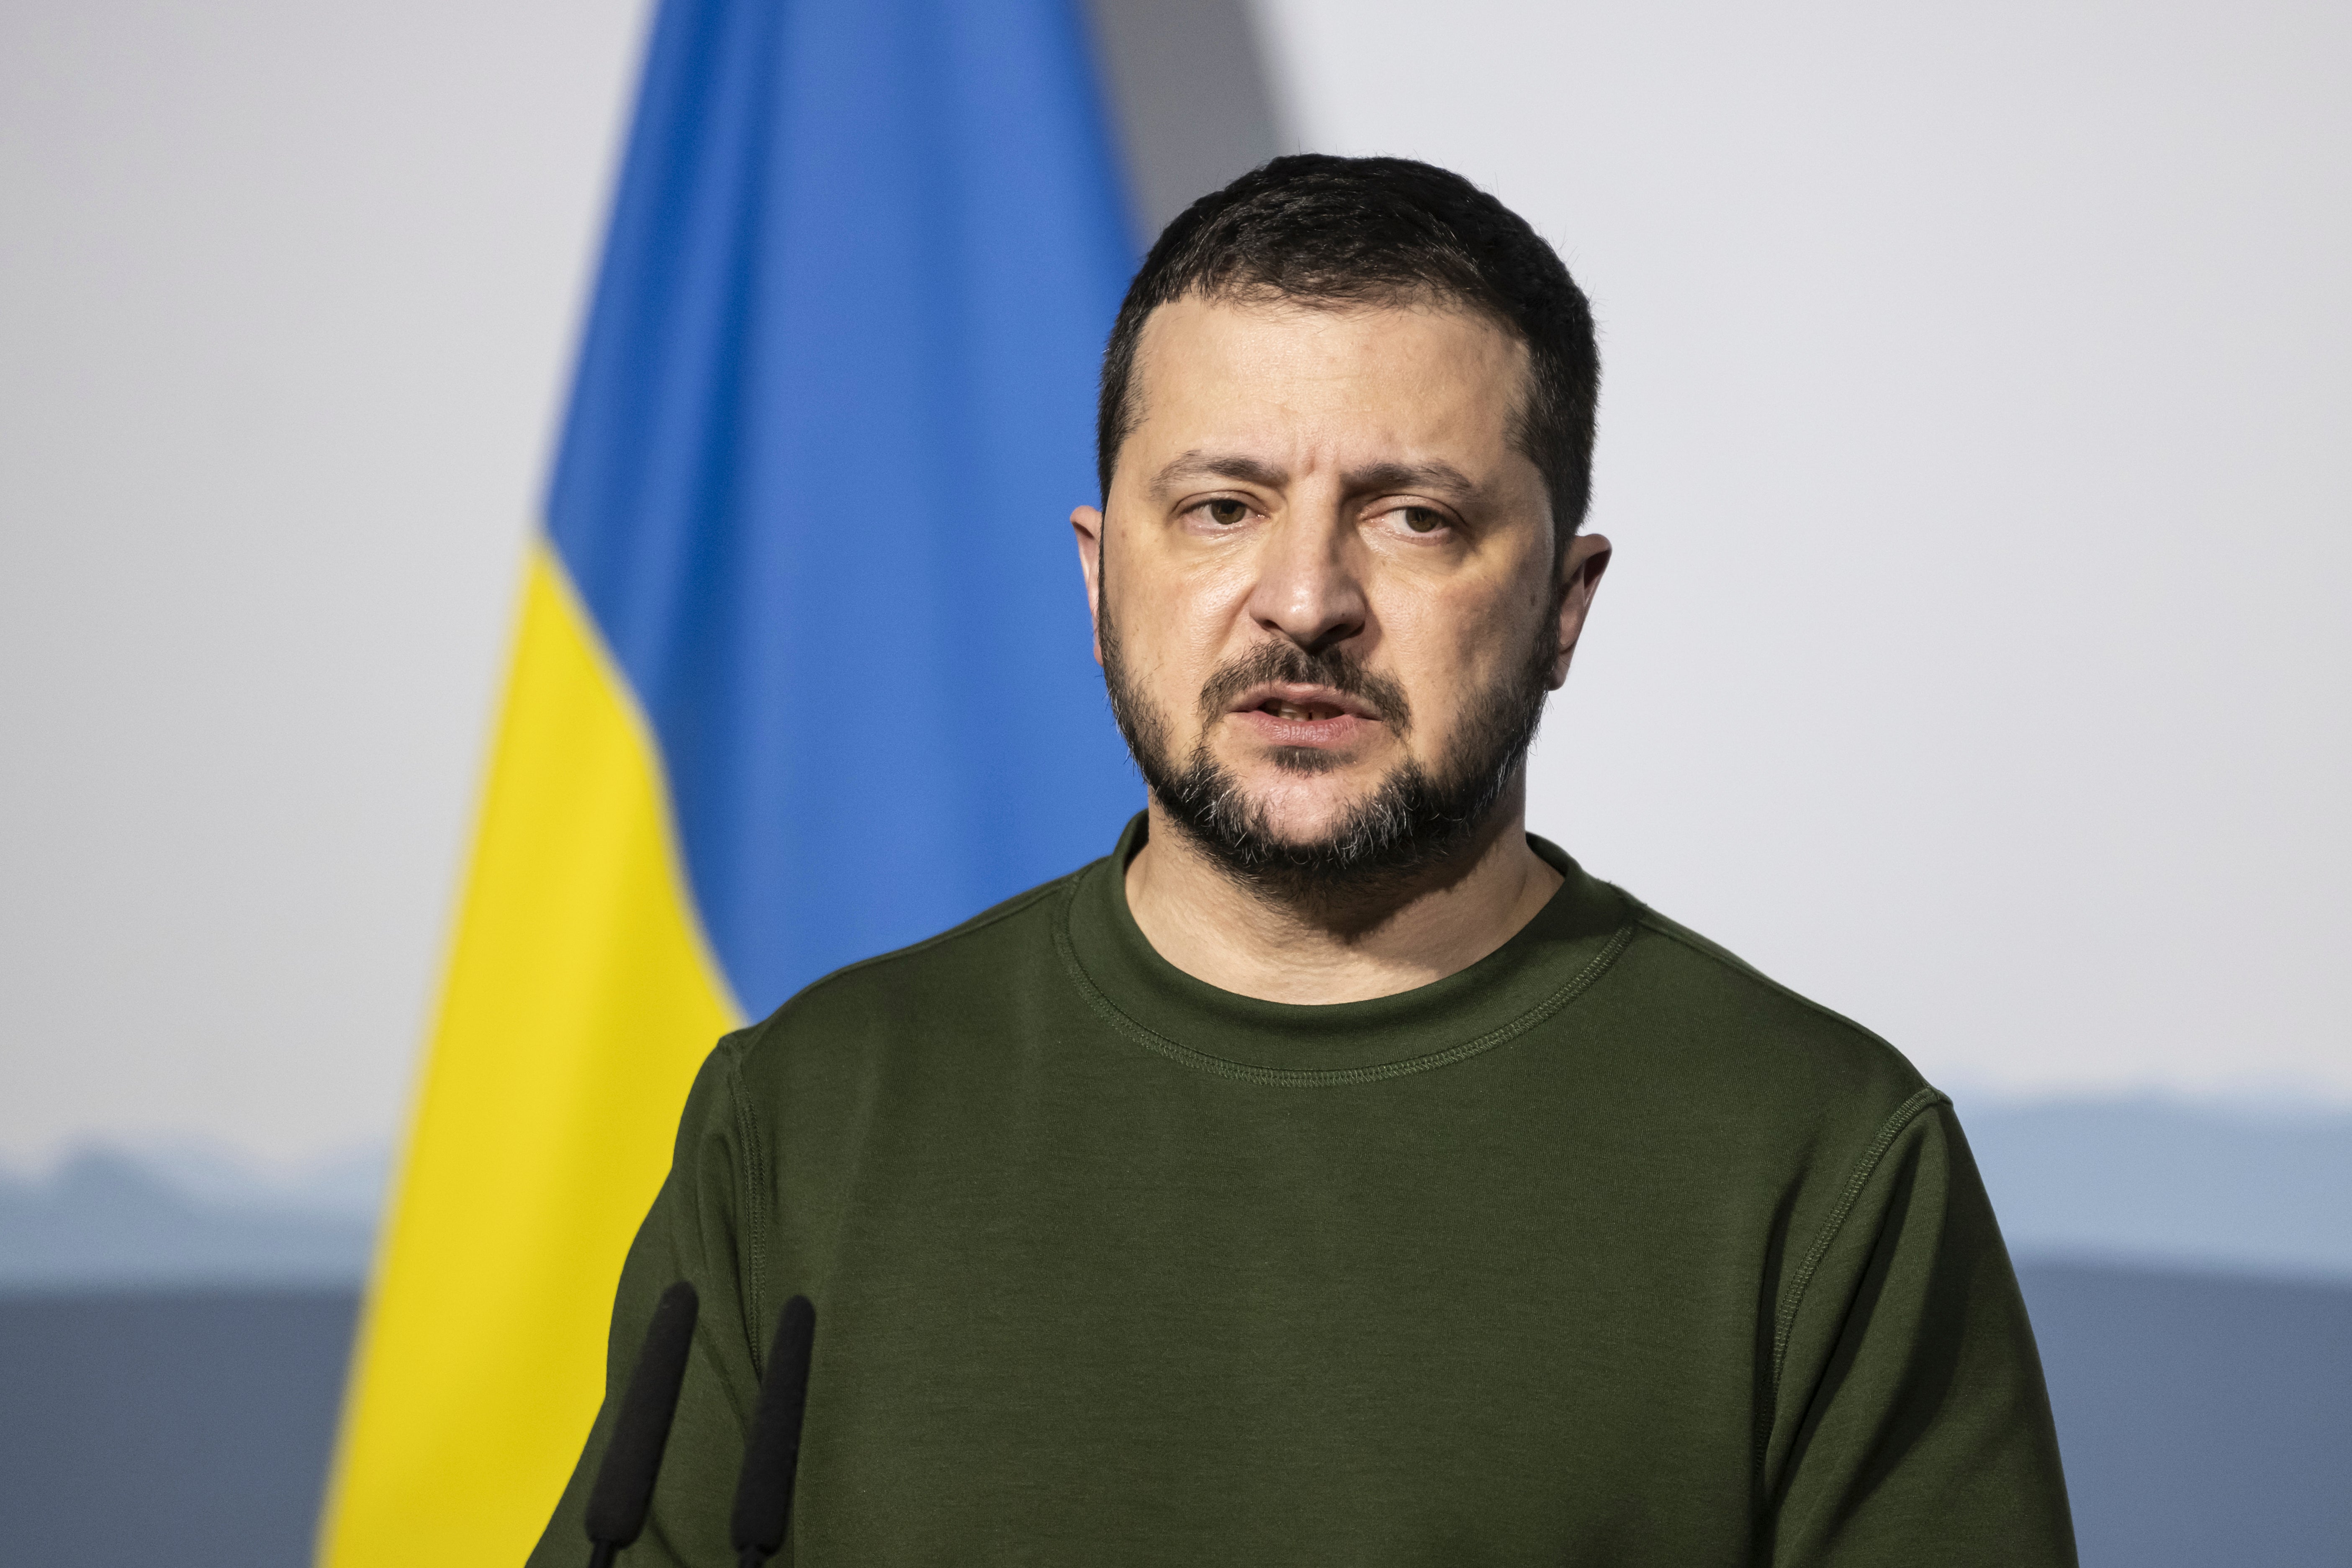 Volodymyr Zelensky would not have wanted General Zaluzhny’s fate to become such a hot-button issue